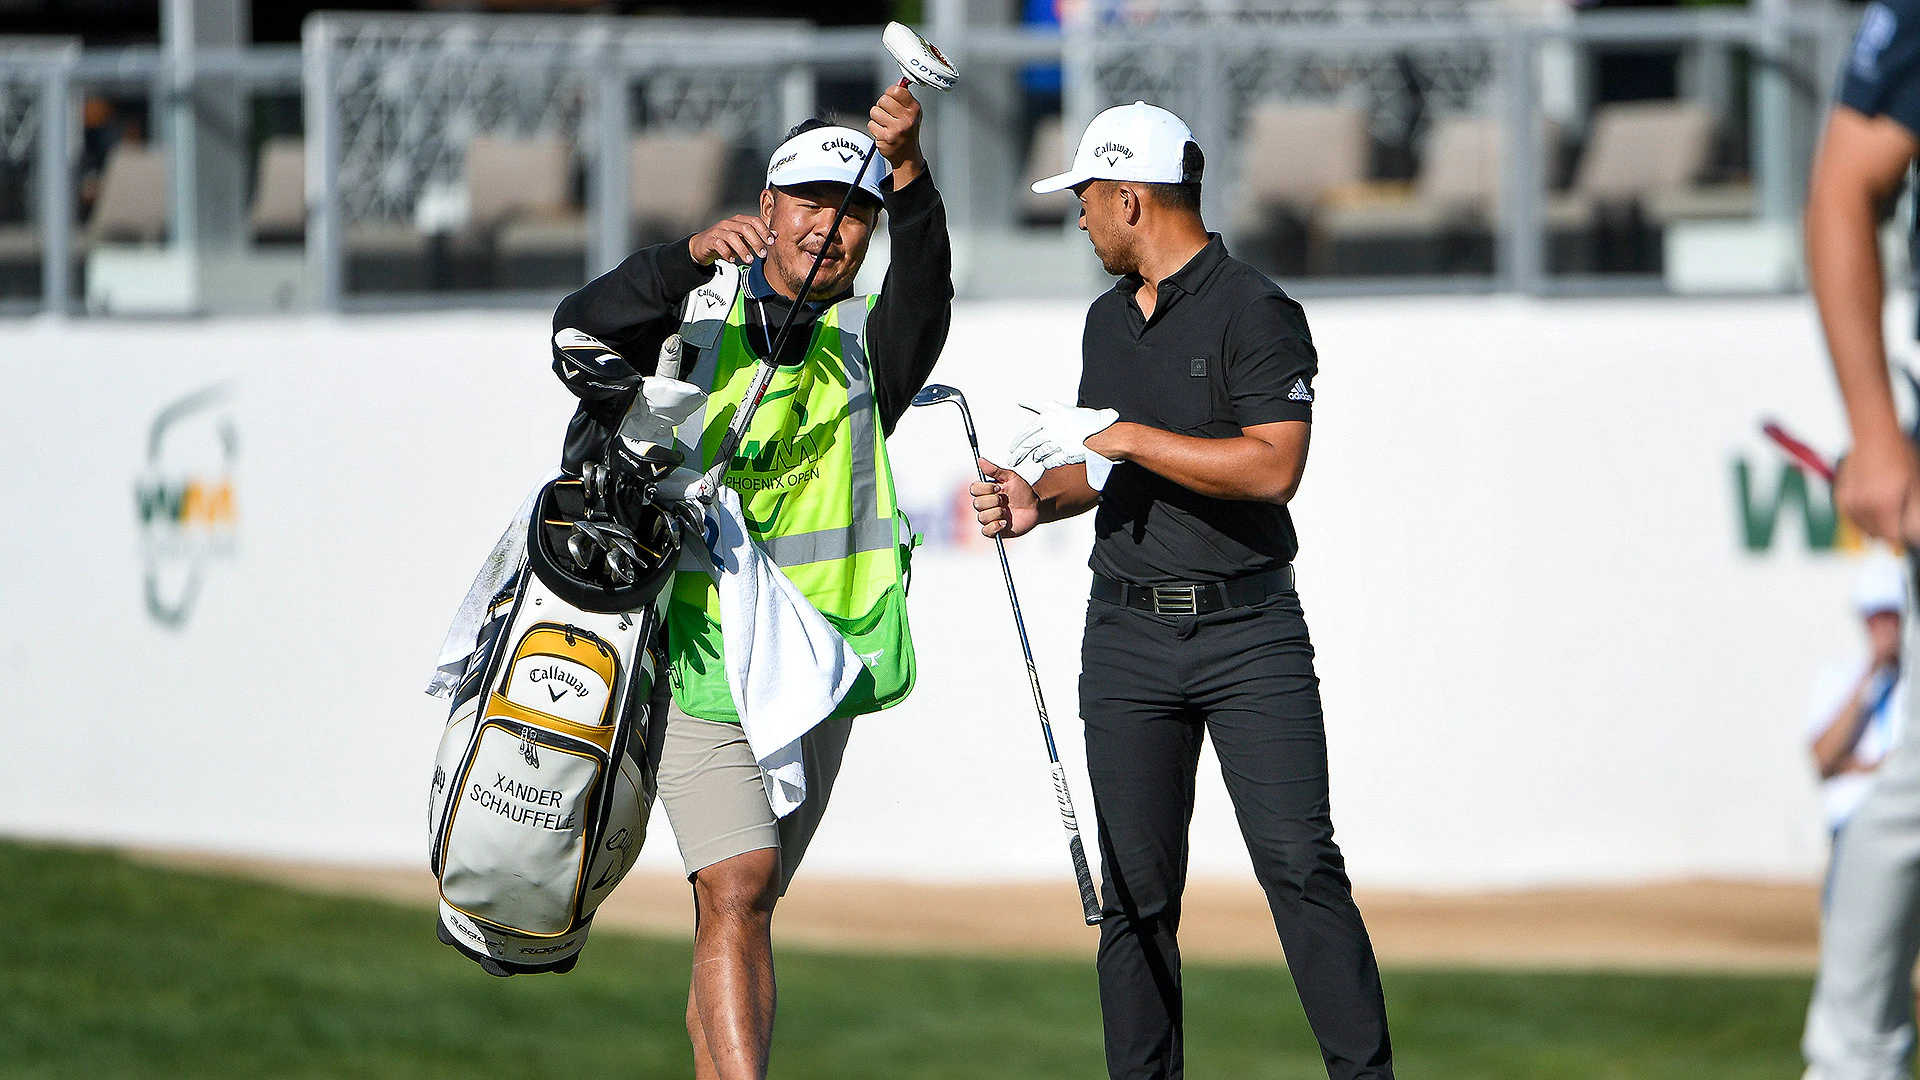 Xander Schauffele (67) fine ‘for now’ after caddie tests positive for COVID-19